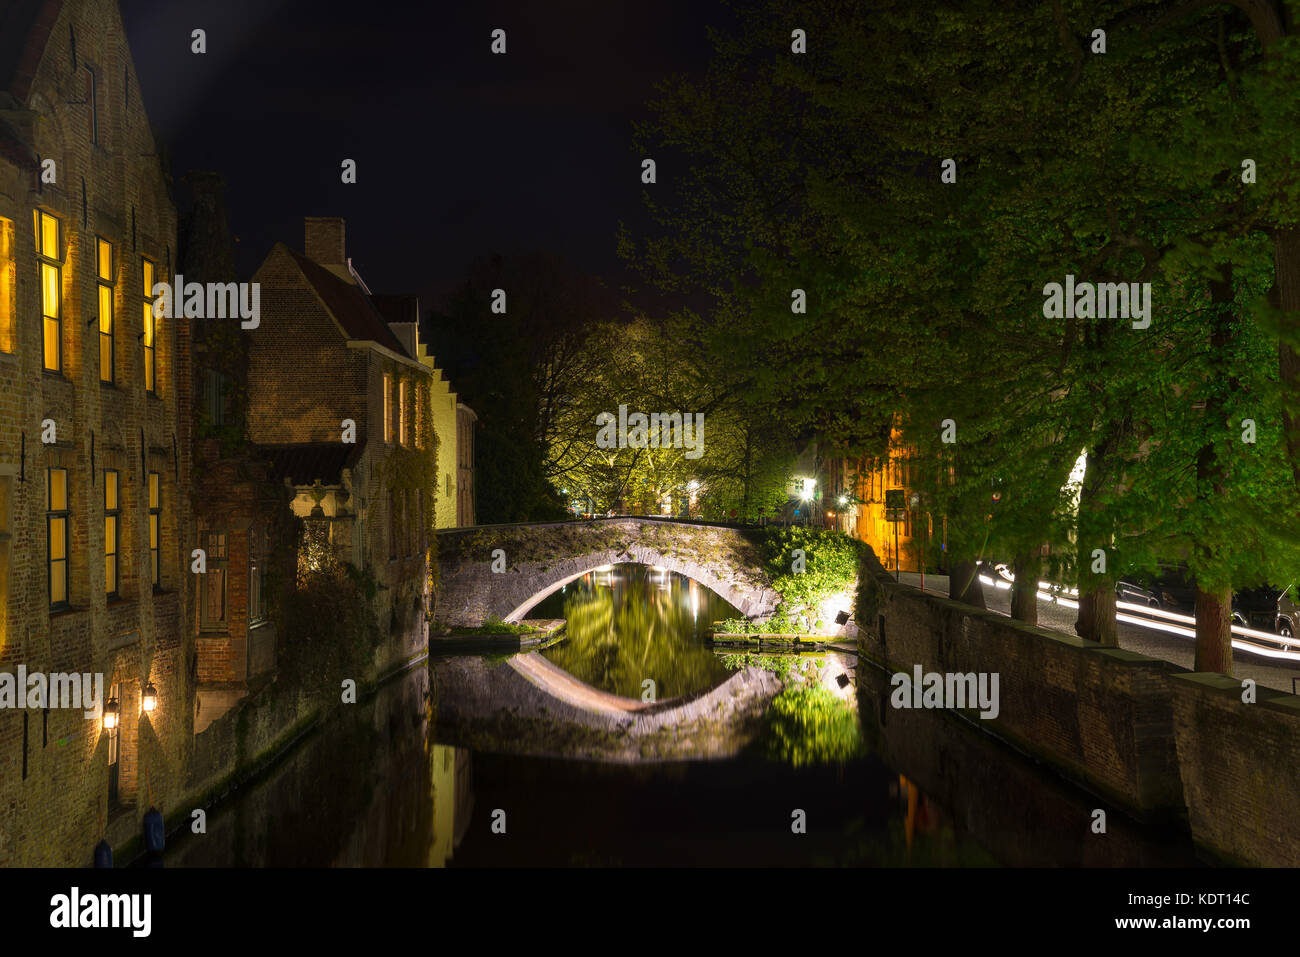 Bruges, Belgium - April 17, 2017: Night shot of historic medieval buildings along a canal in Bruges, Belgium Stock Photo